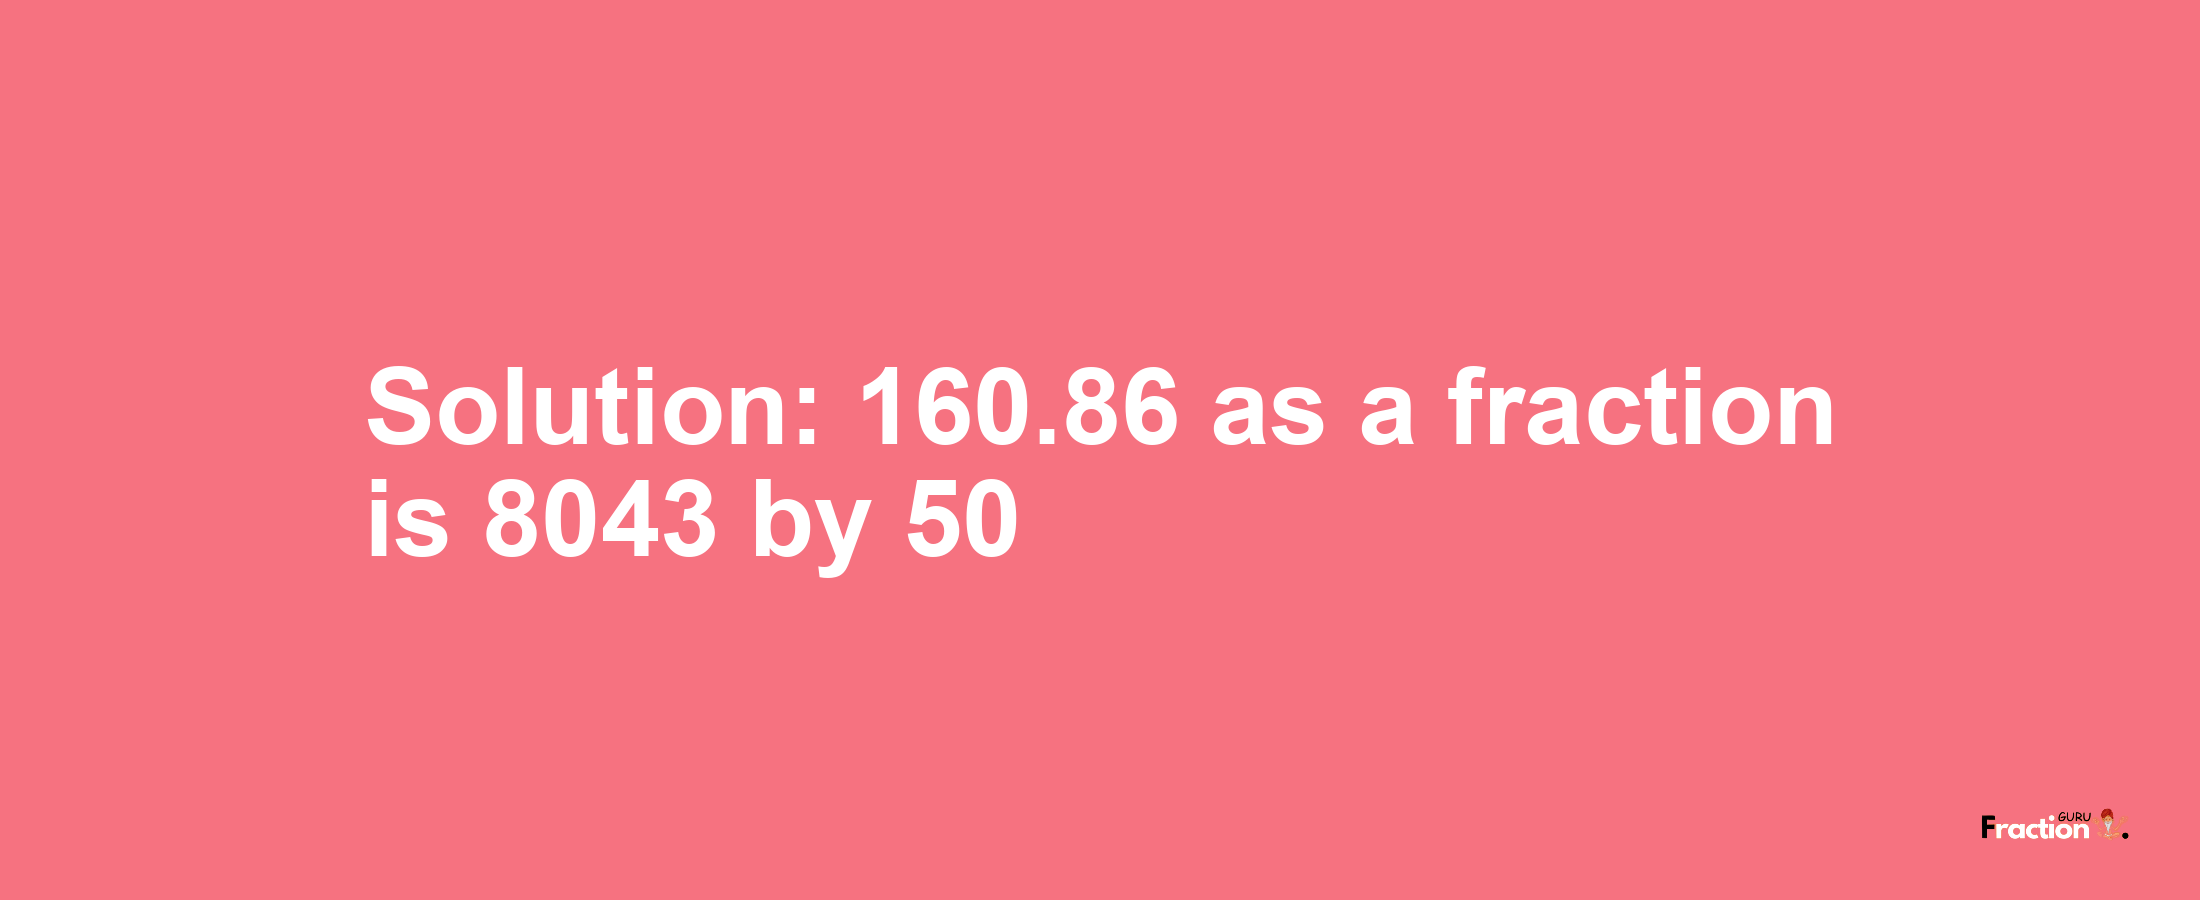 Solution:160.86 as a fraction is 8043/50